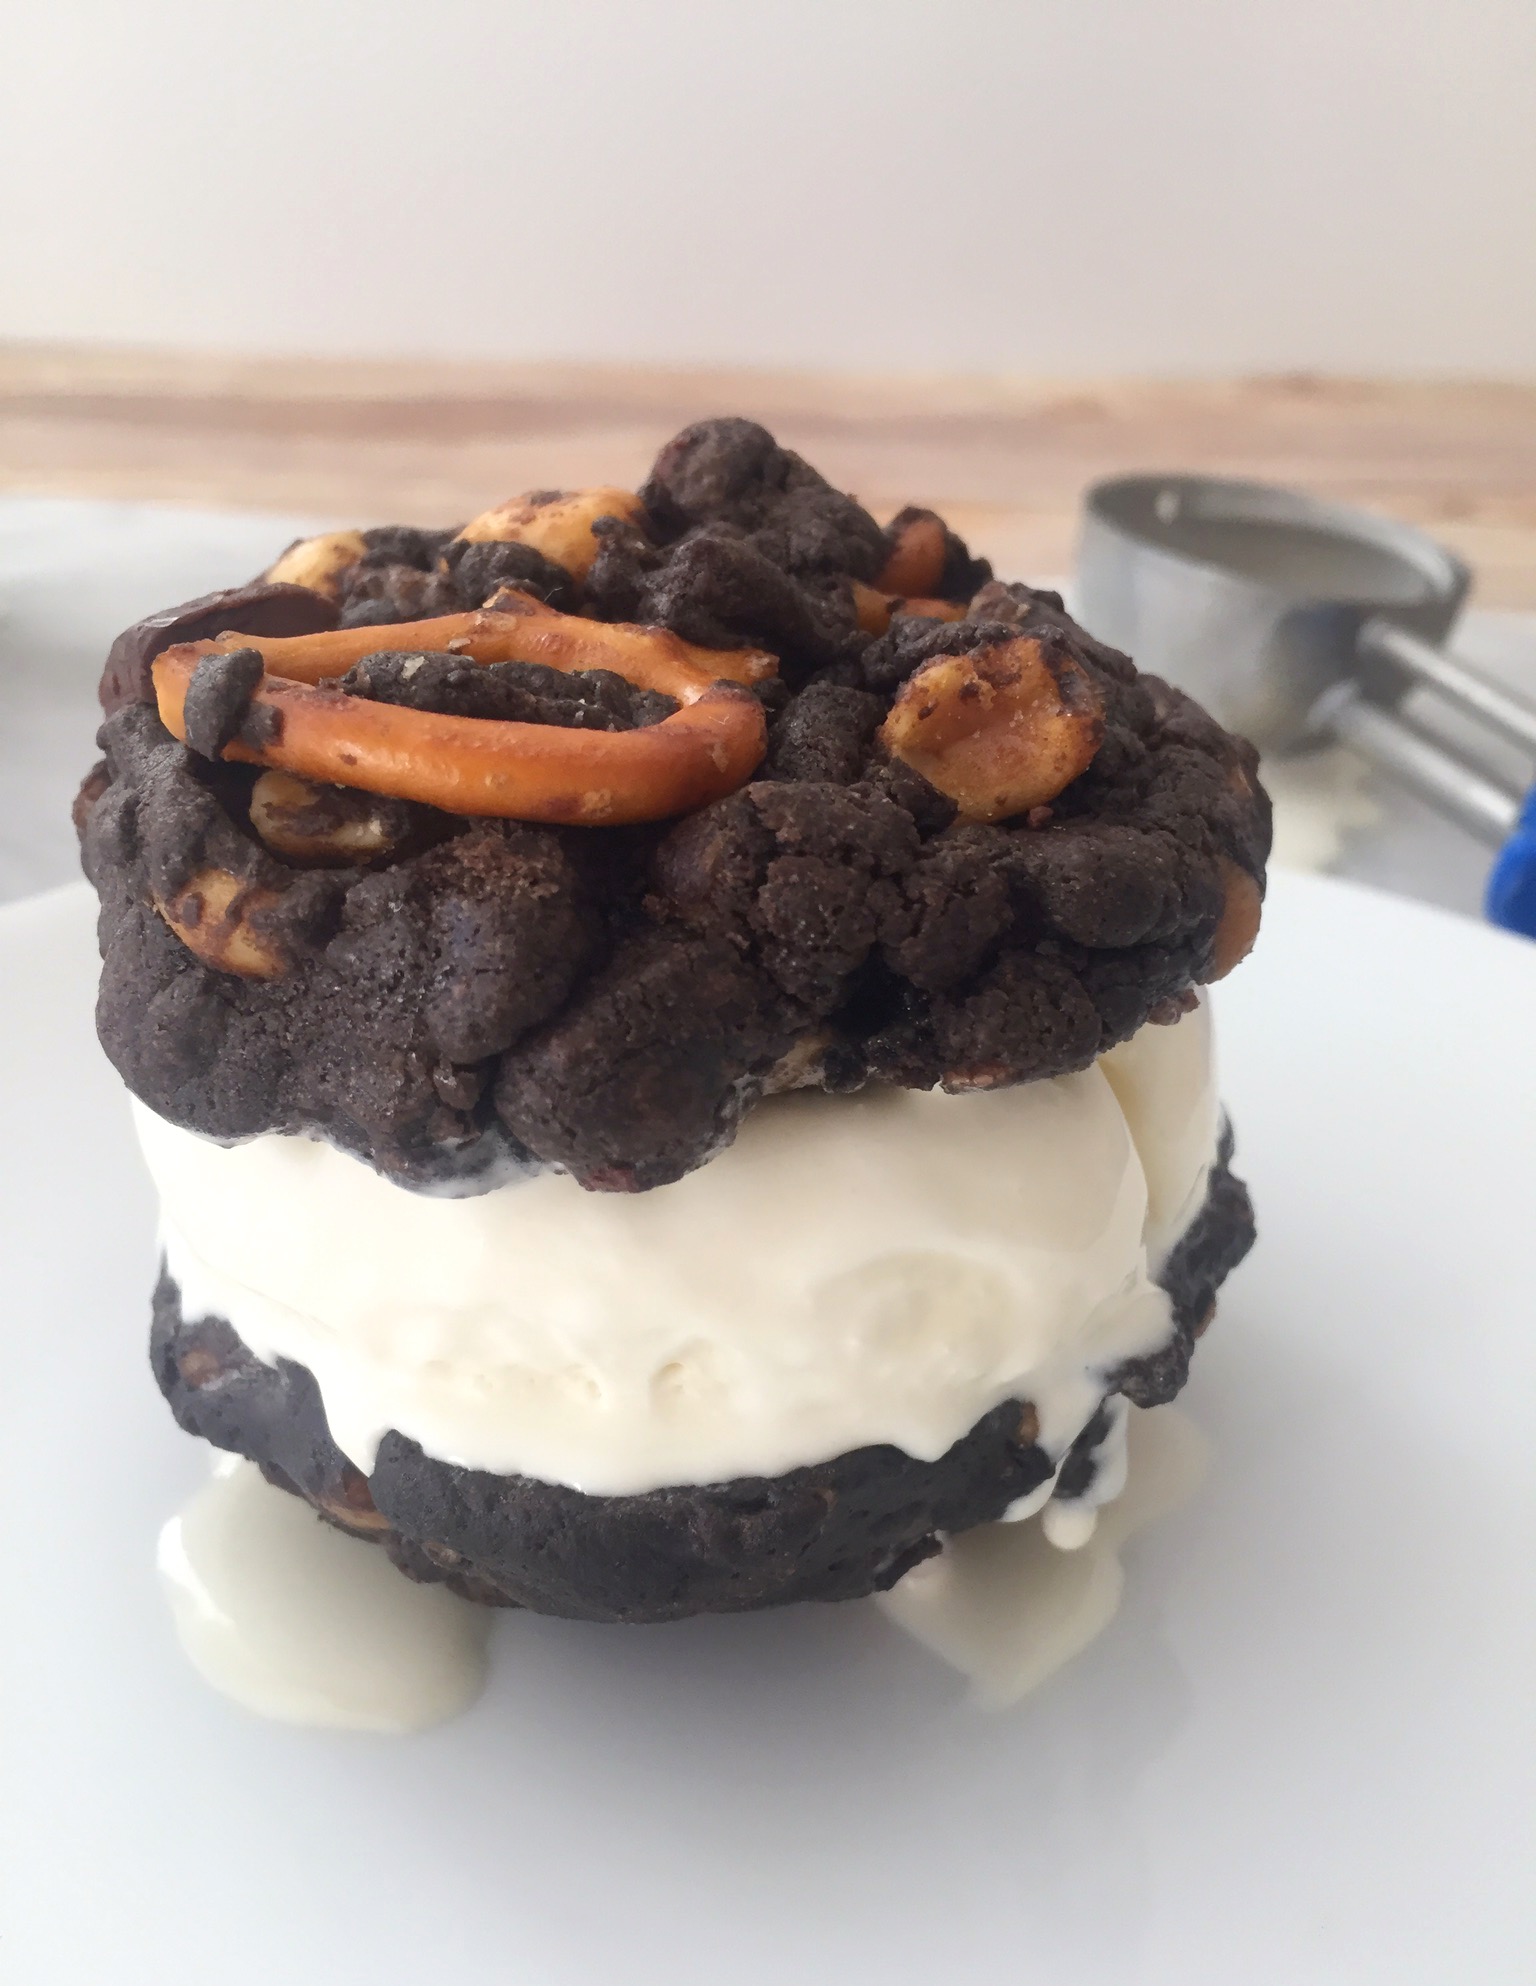 Fully Loaded Chocolate Snack Attack Cookie Ice Cream Sandwiches by Brownie Mischief